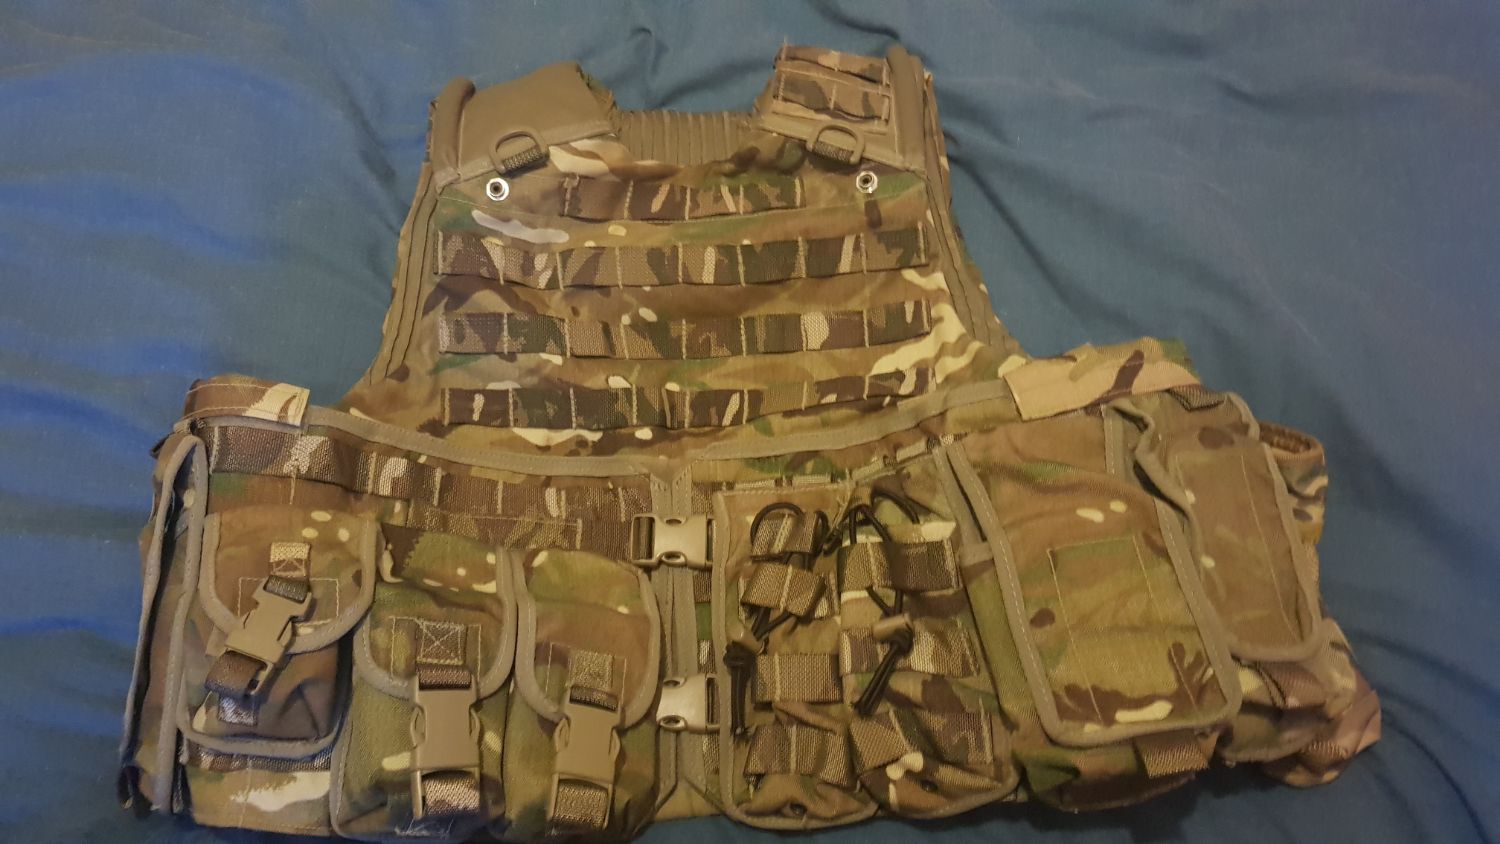 Ospray mk4 Armour vest with accessories - HPA - Airsoft Forums UK